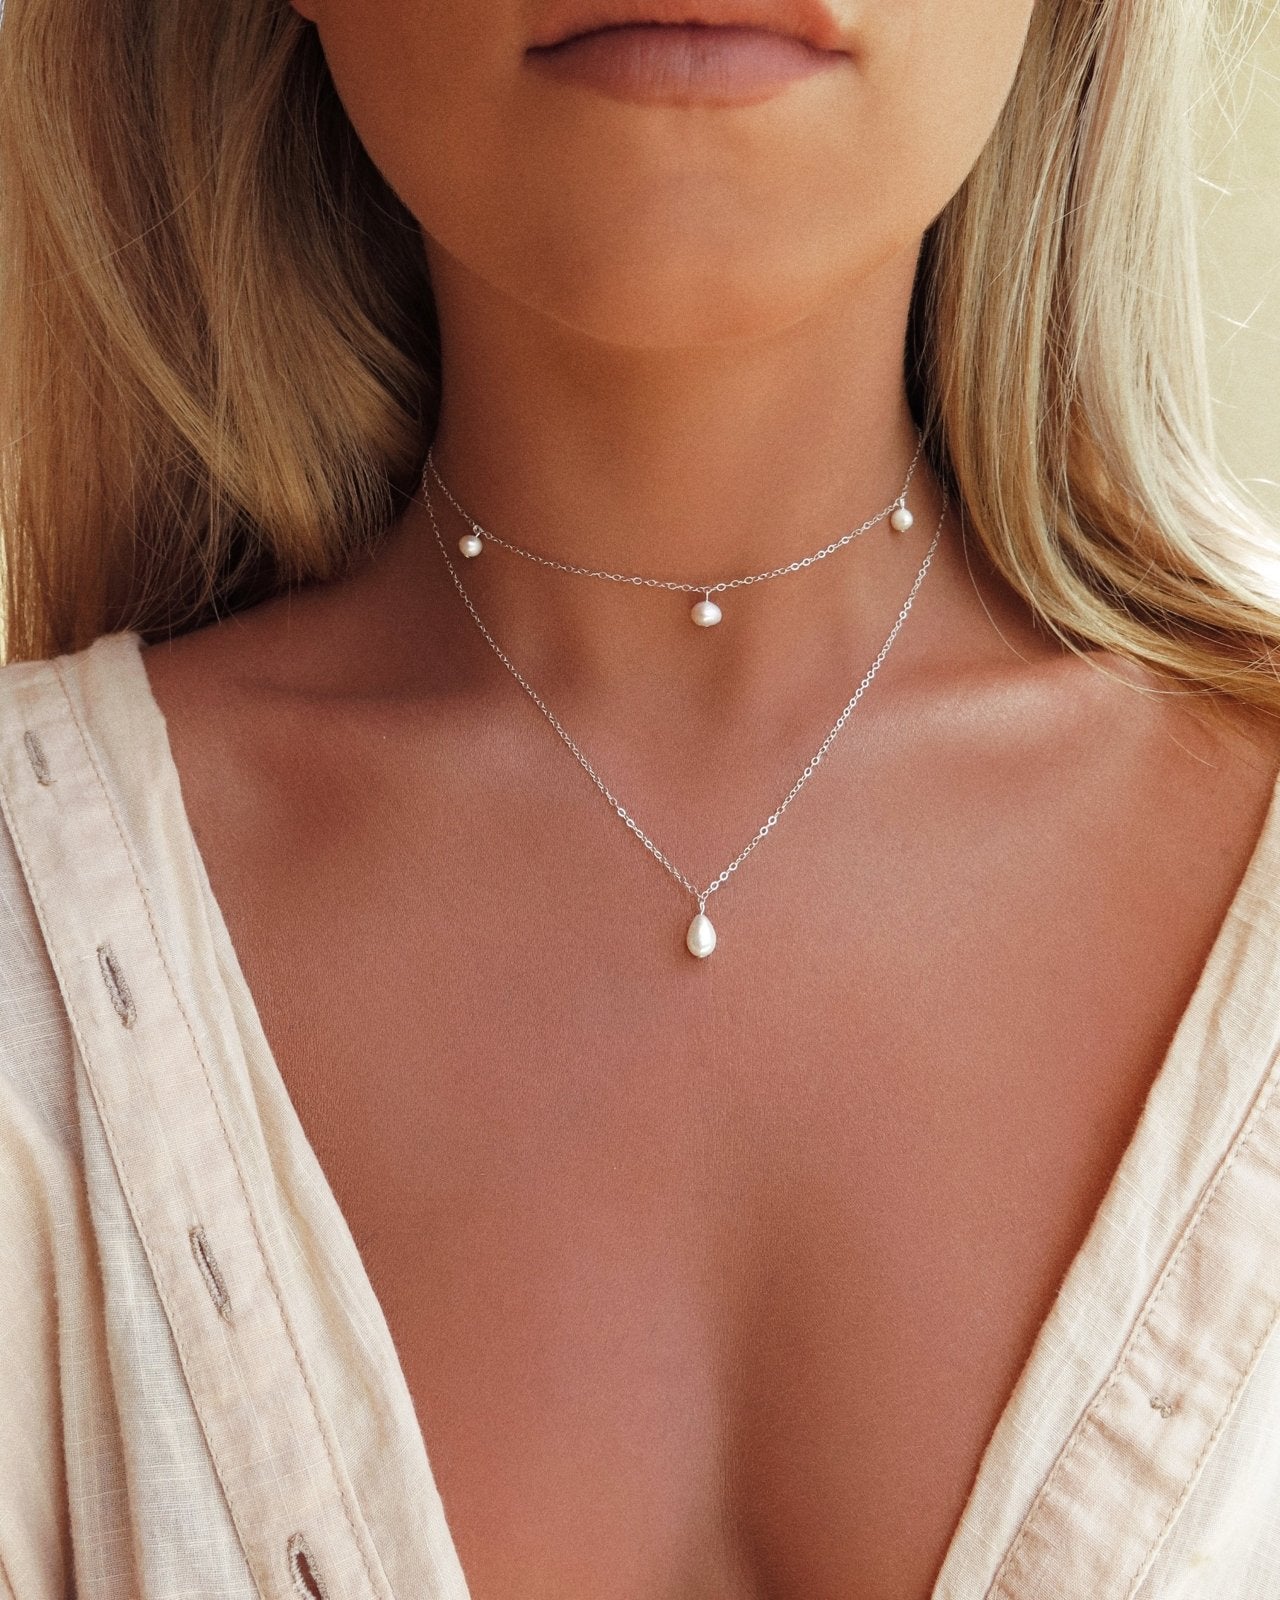 TRIPLE FRESHWATER PEARL NECKLACE- Sterling Silver - The Littl - Deluxe Chain - 37cm (choker)